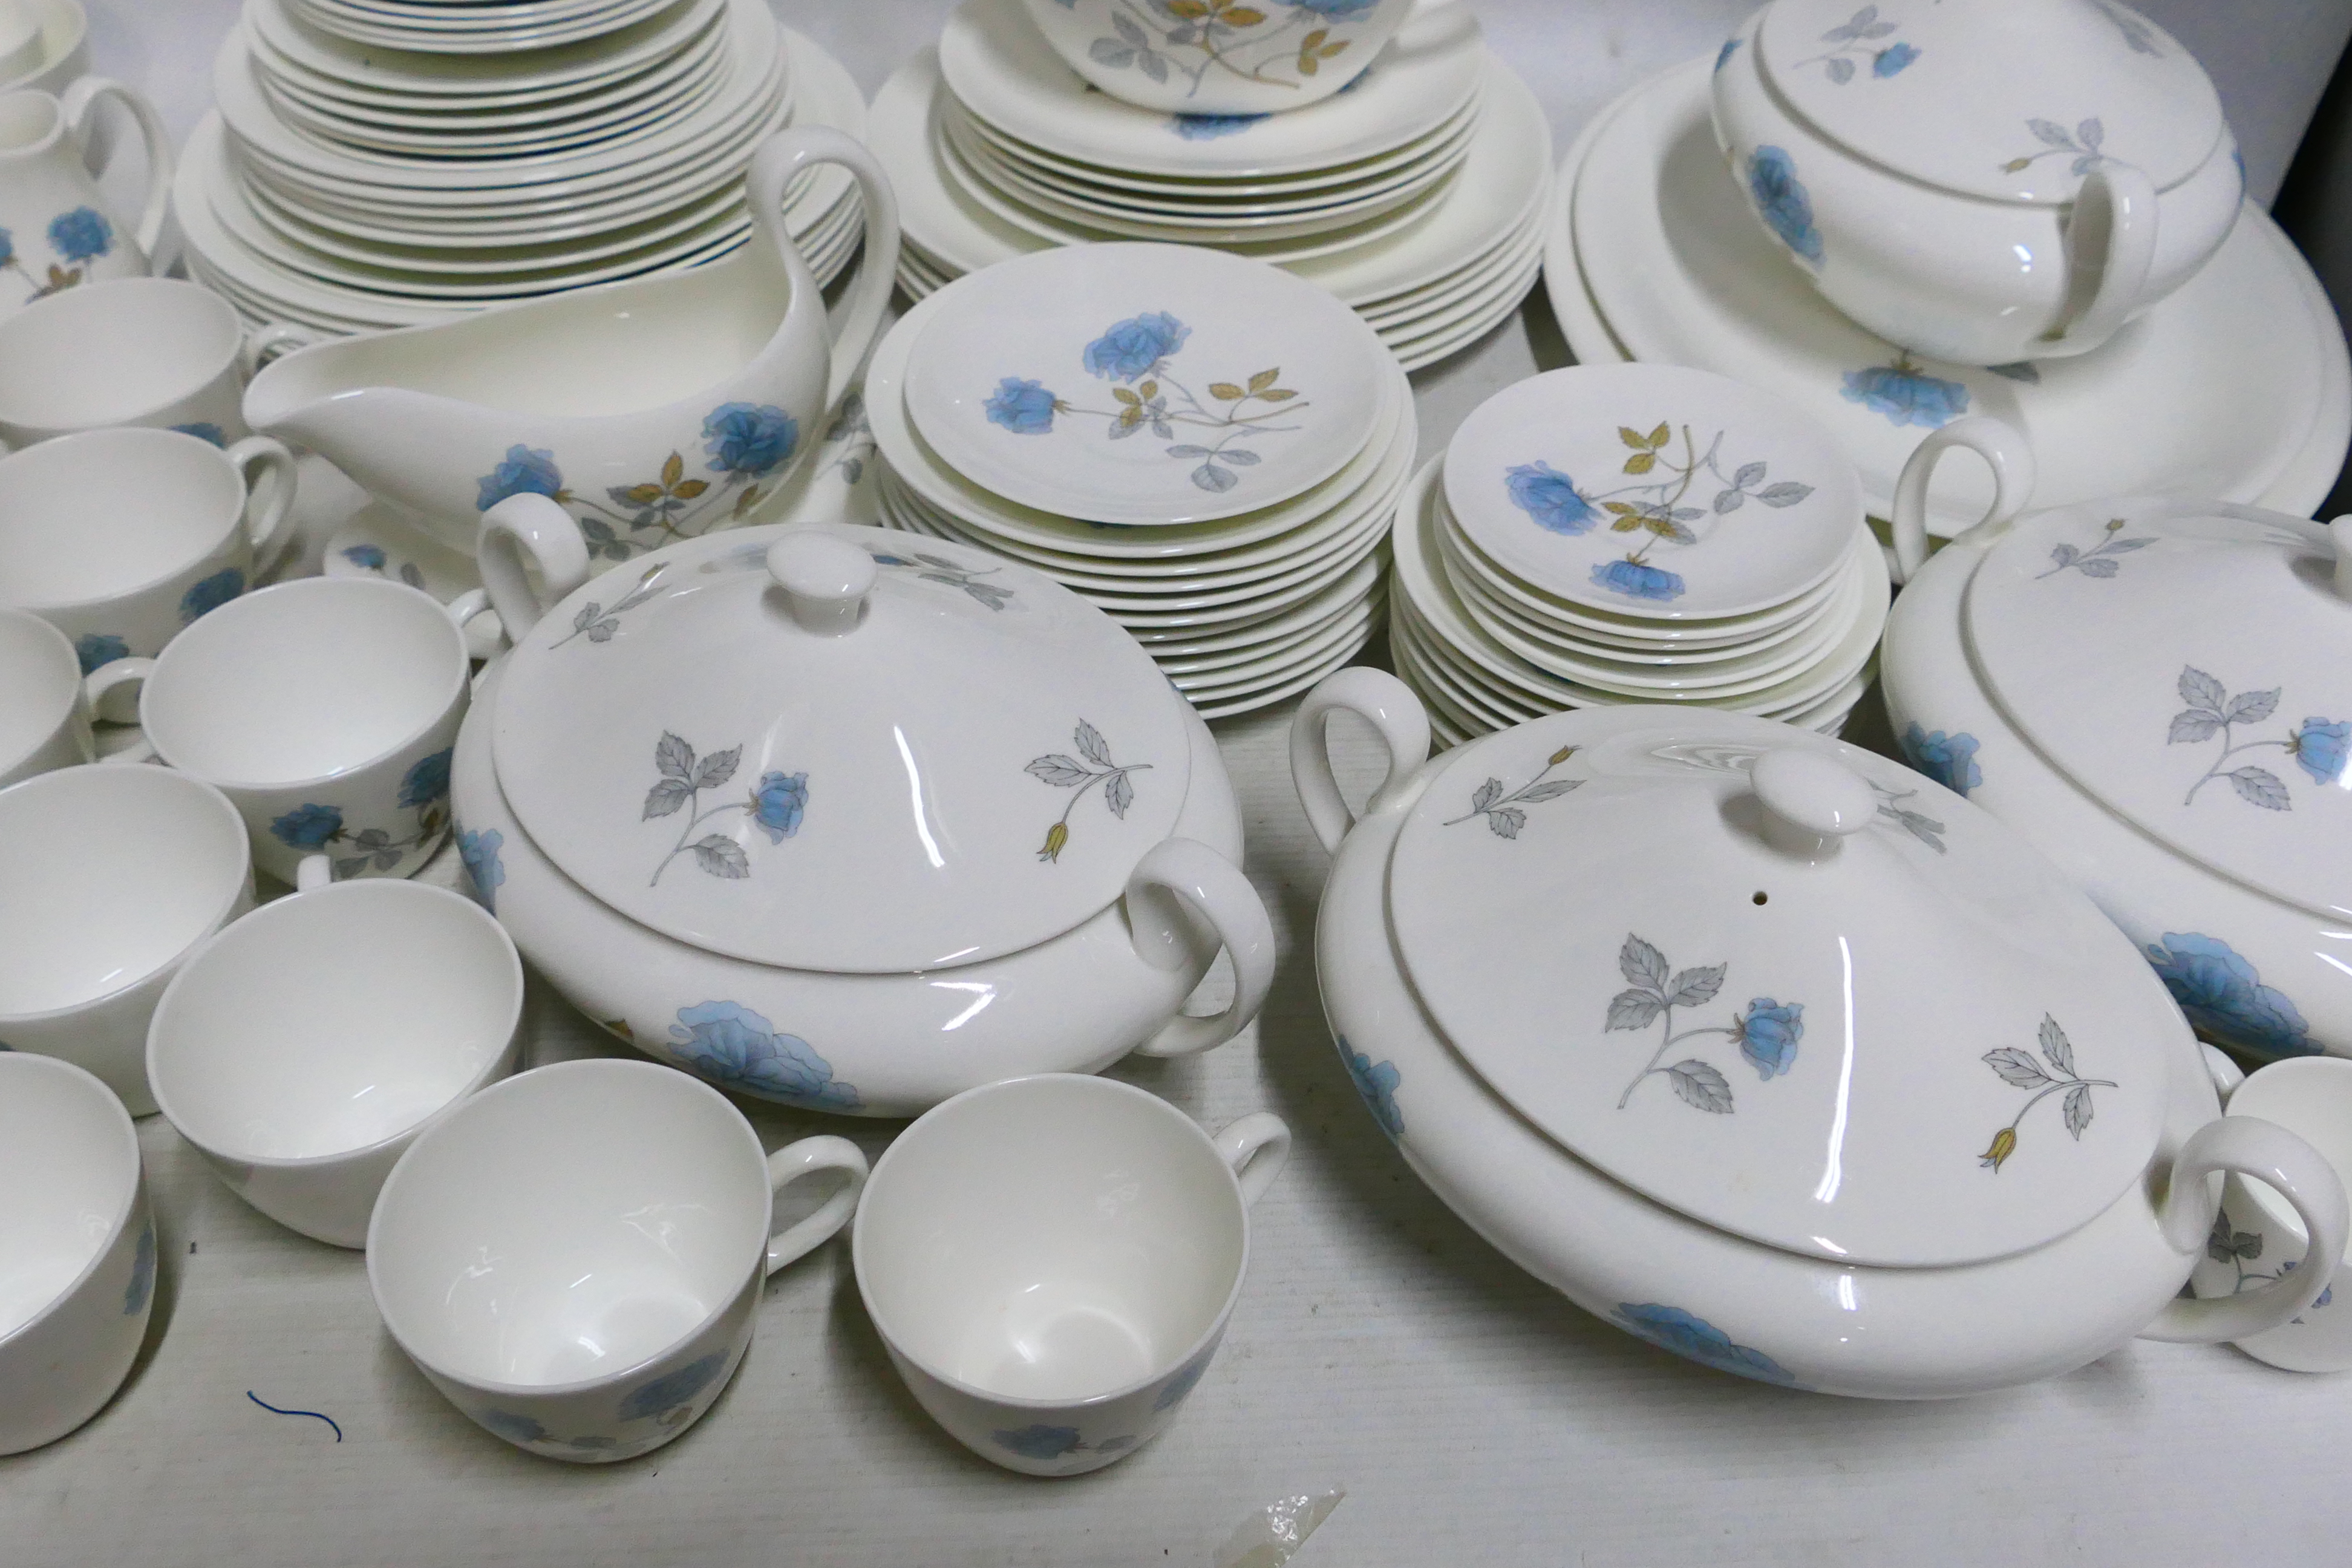 Wedgwood - A large Wedgwood Ice Rose dinner/tea set - Pieces include soup bowls, cream jugs, - Image 5 of 10